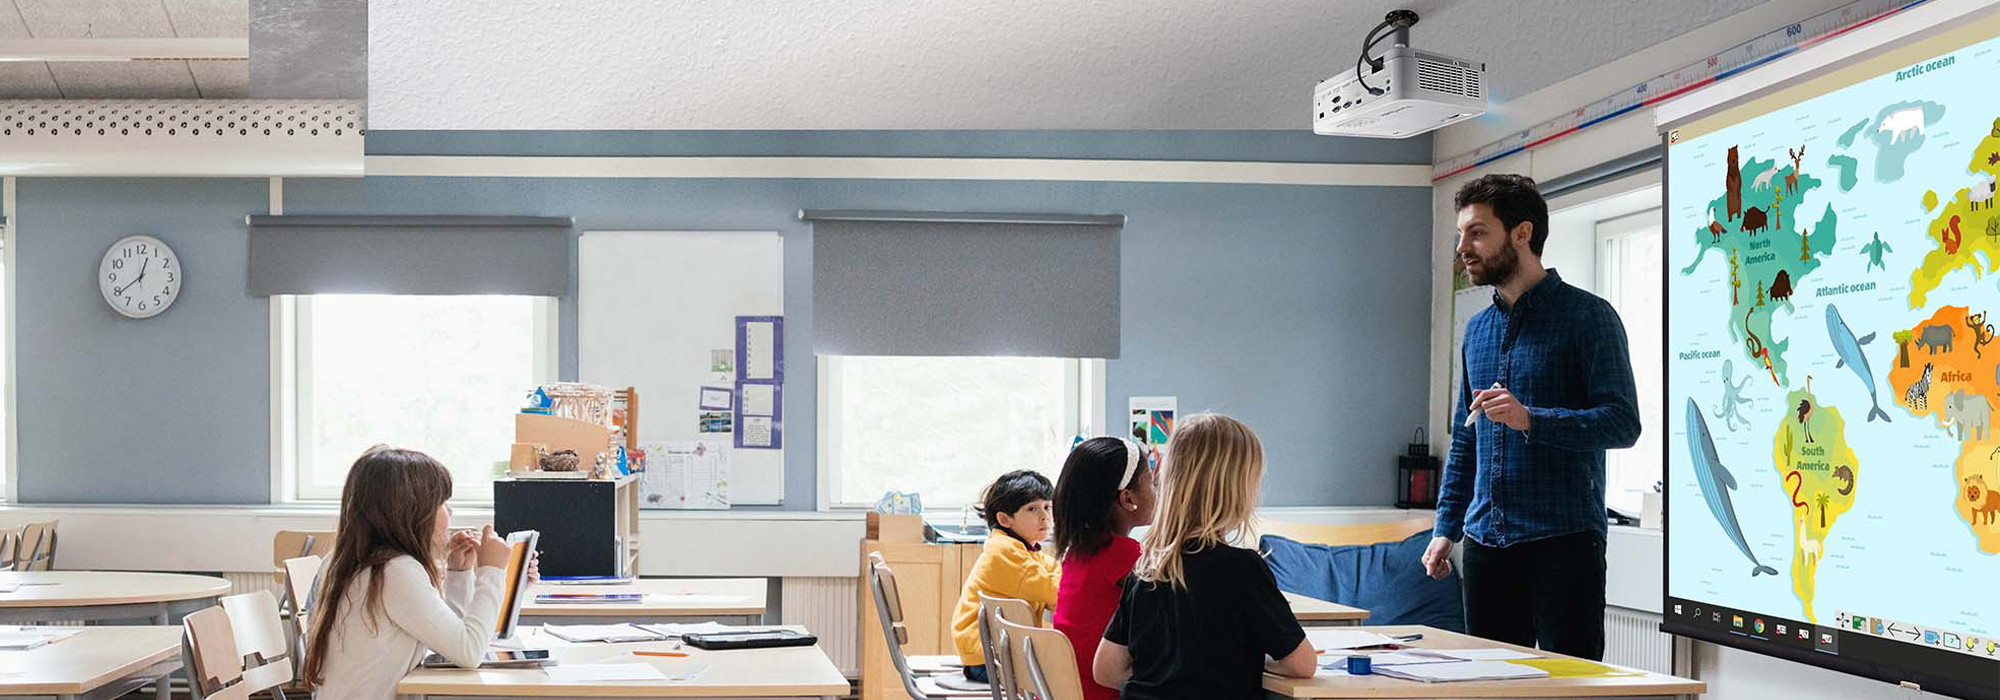 ViewSonic Expands its LED Projector Line with Two New Models for Enterprise and Education Markets